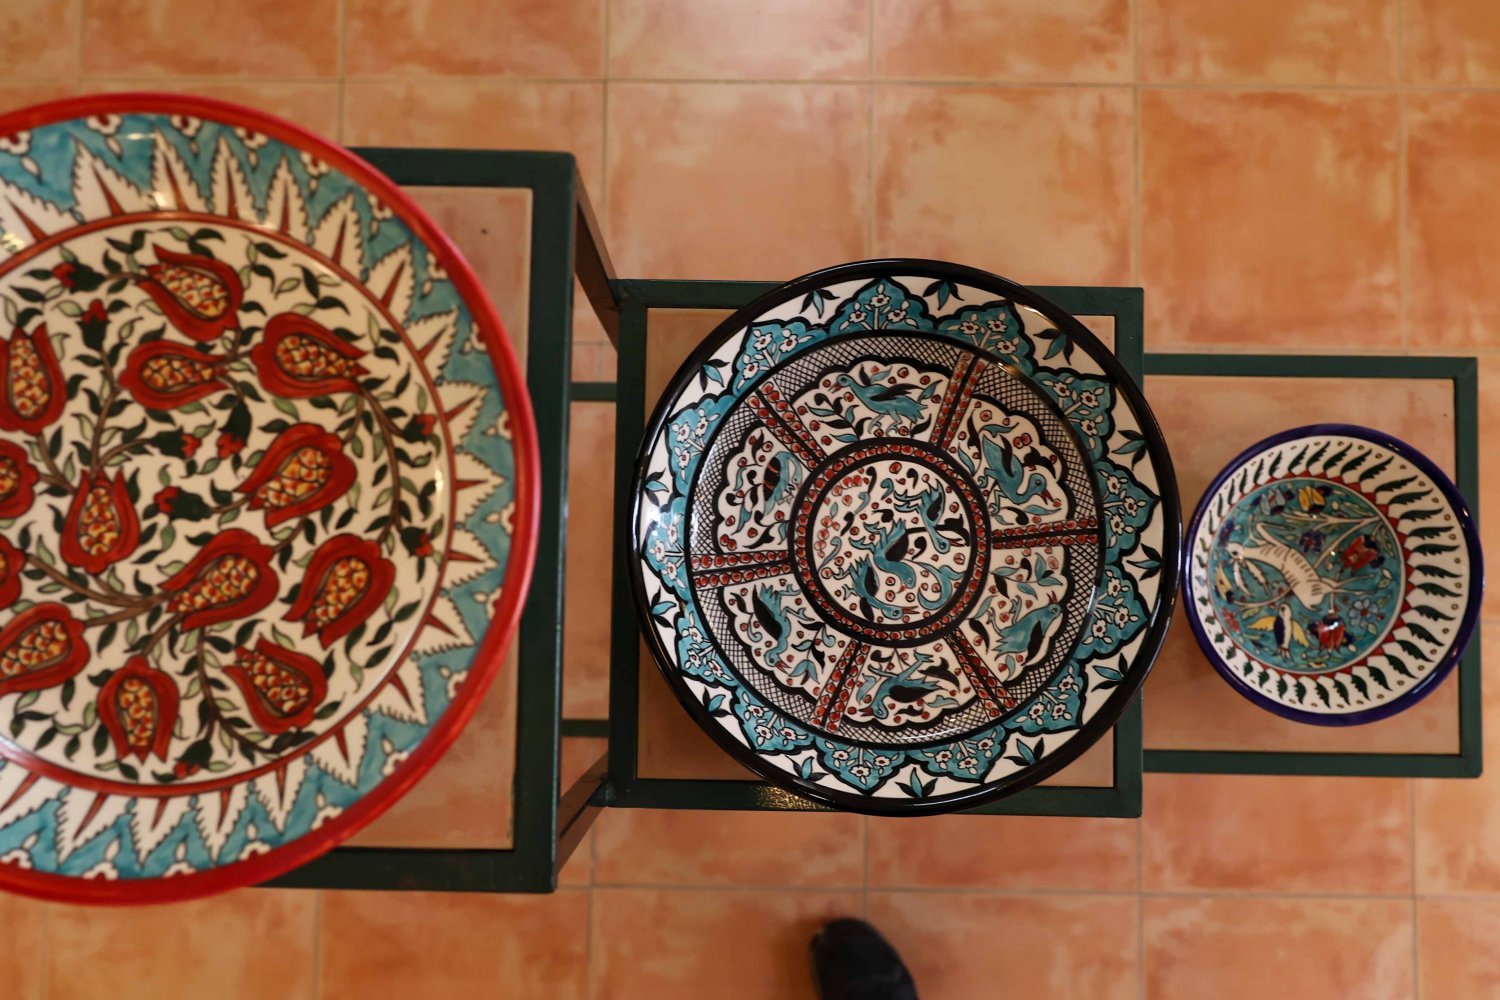 Finished hand-painted Armenian ceramic art pieces on display in the Balian shop in East Jerusalem 